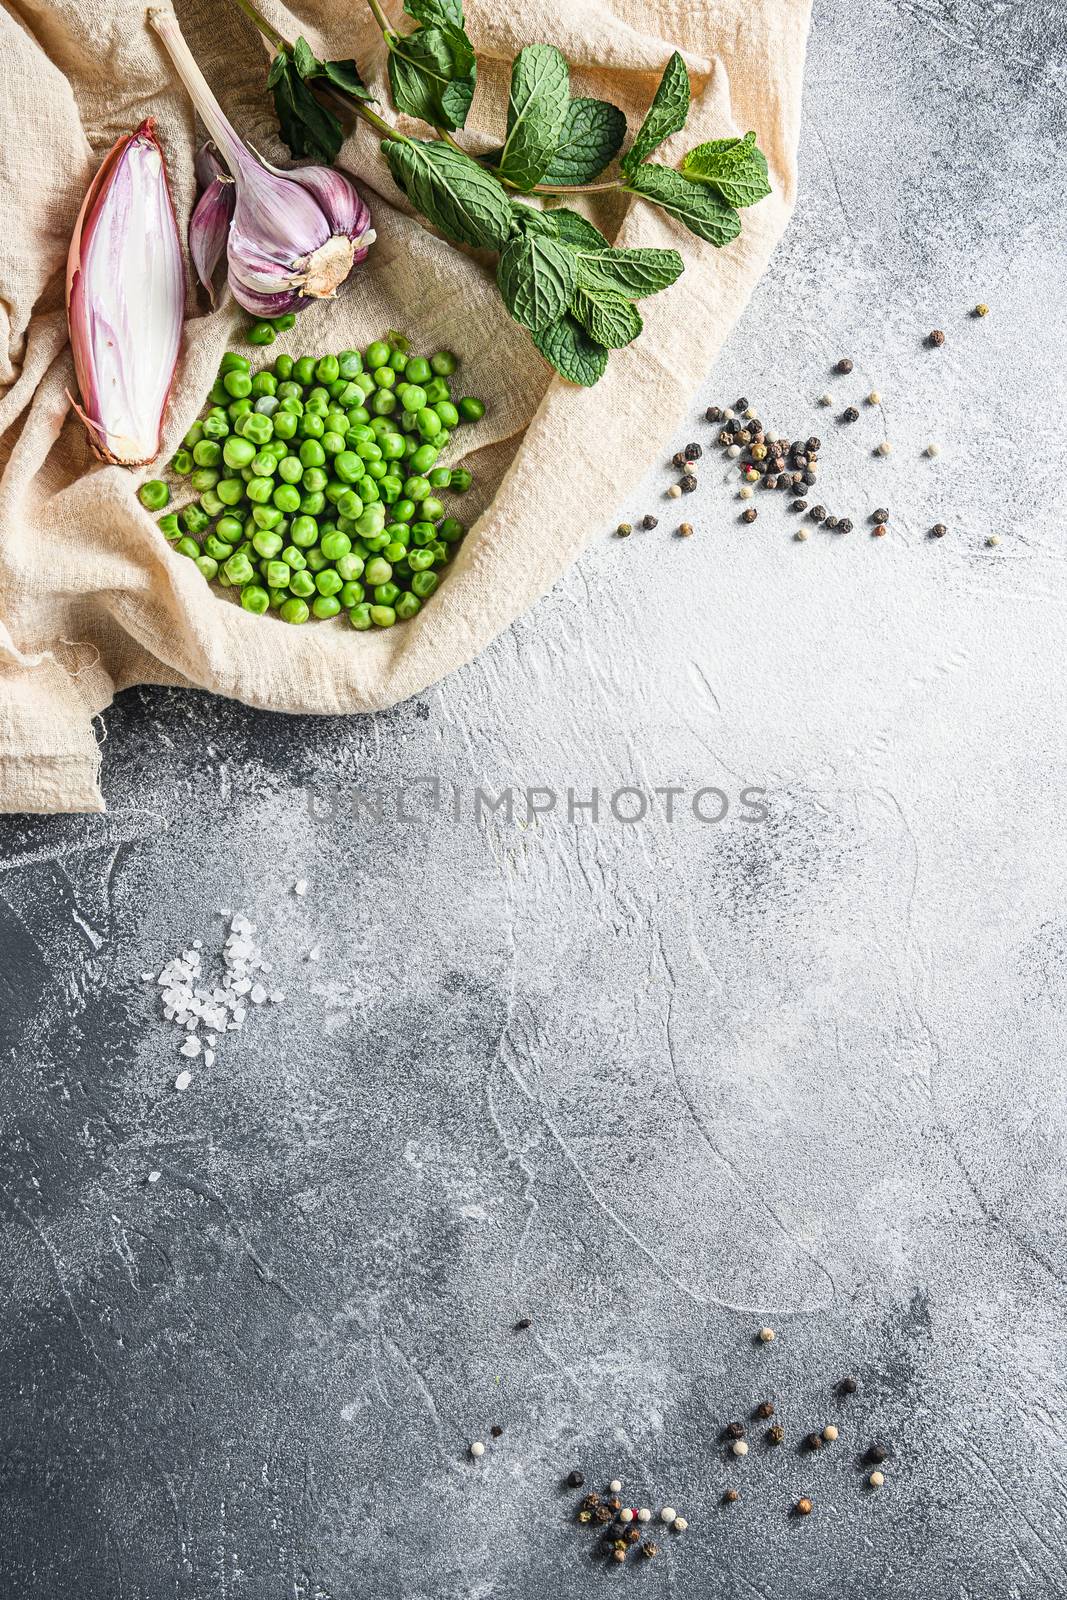 english style mushy peas organic ingredients peas mint shallot pepper and salt keto food photo over grey stone background and cloth top view vertical. Concept space for text by Ilianesolenyi